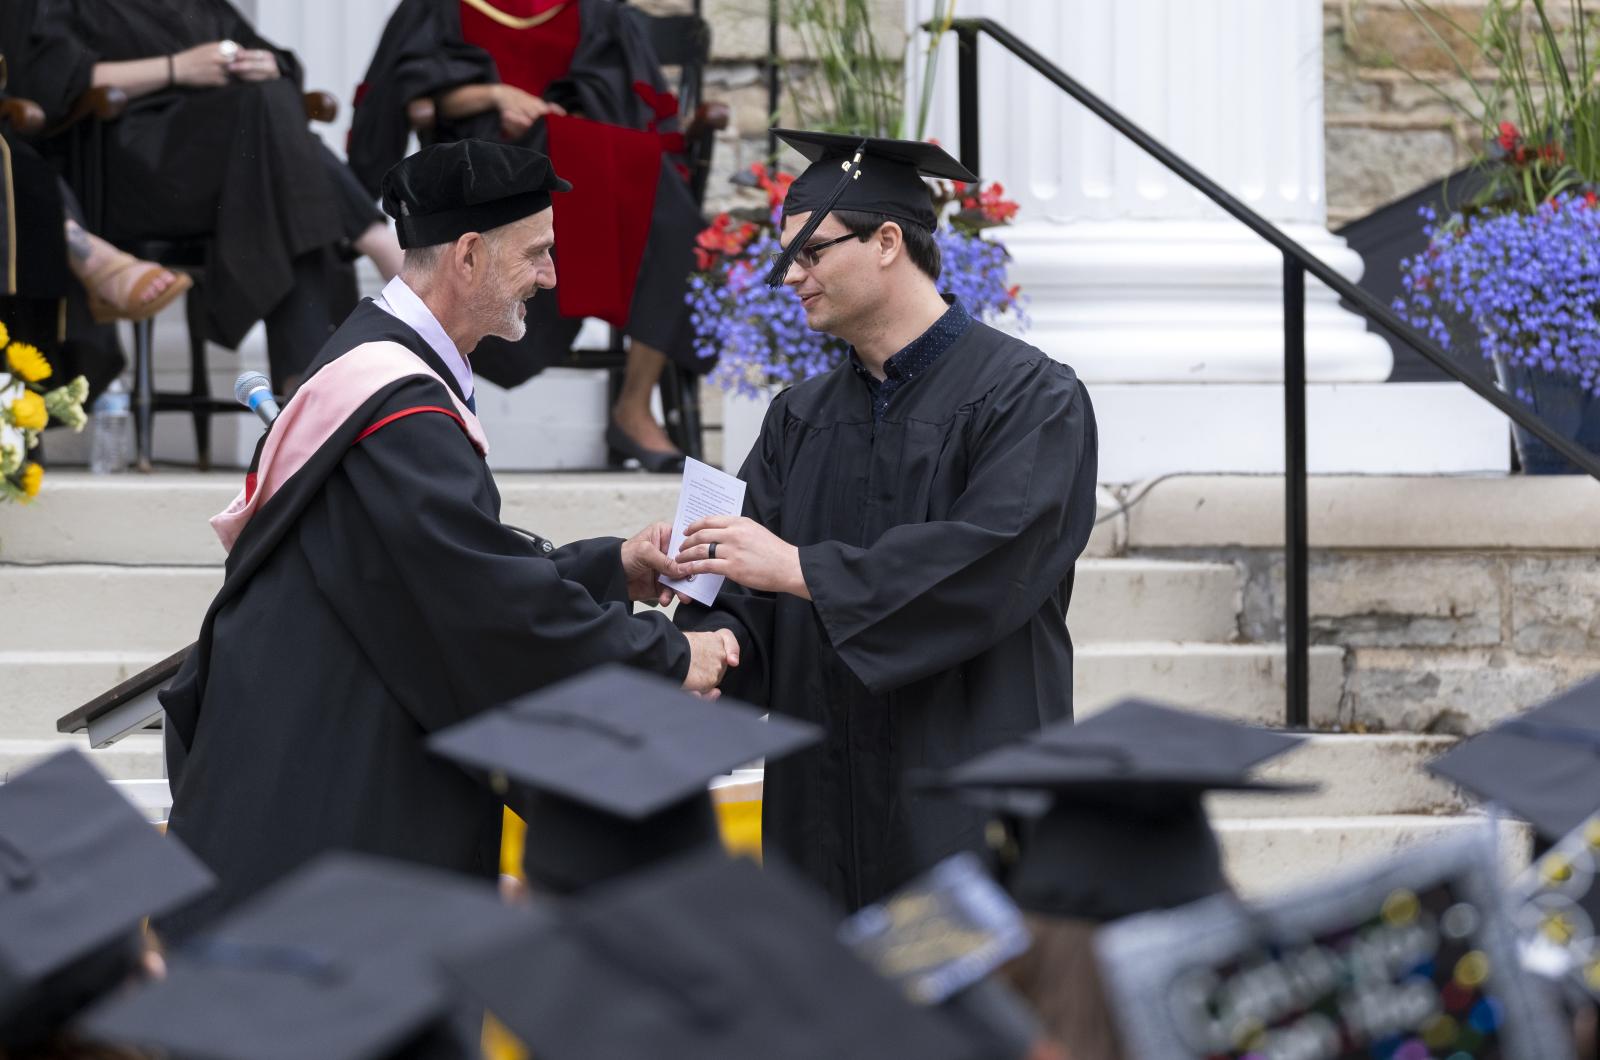 Brian Pertl shakes the hand of a 2020 graduate. Both are dressed in regalia.